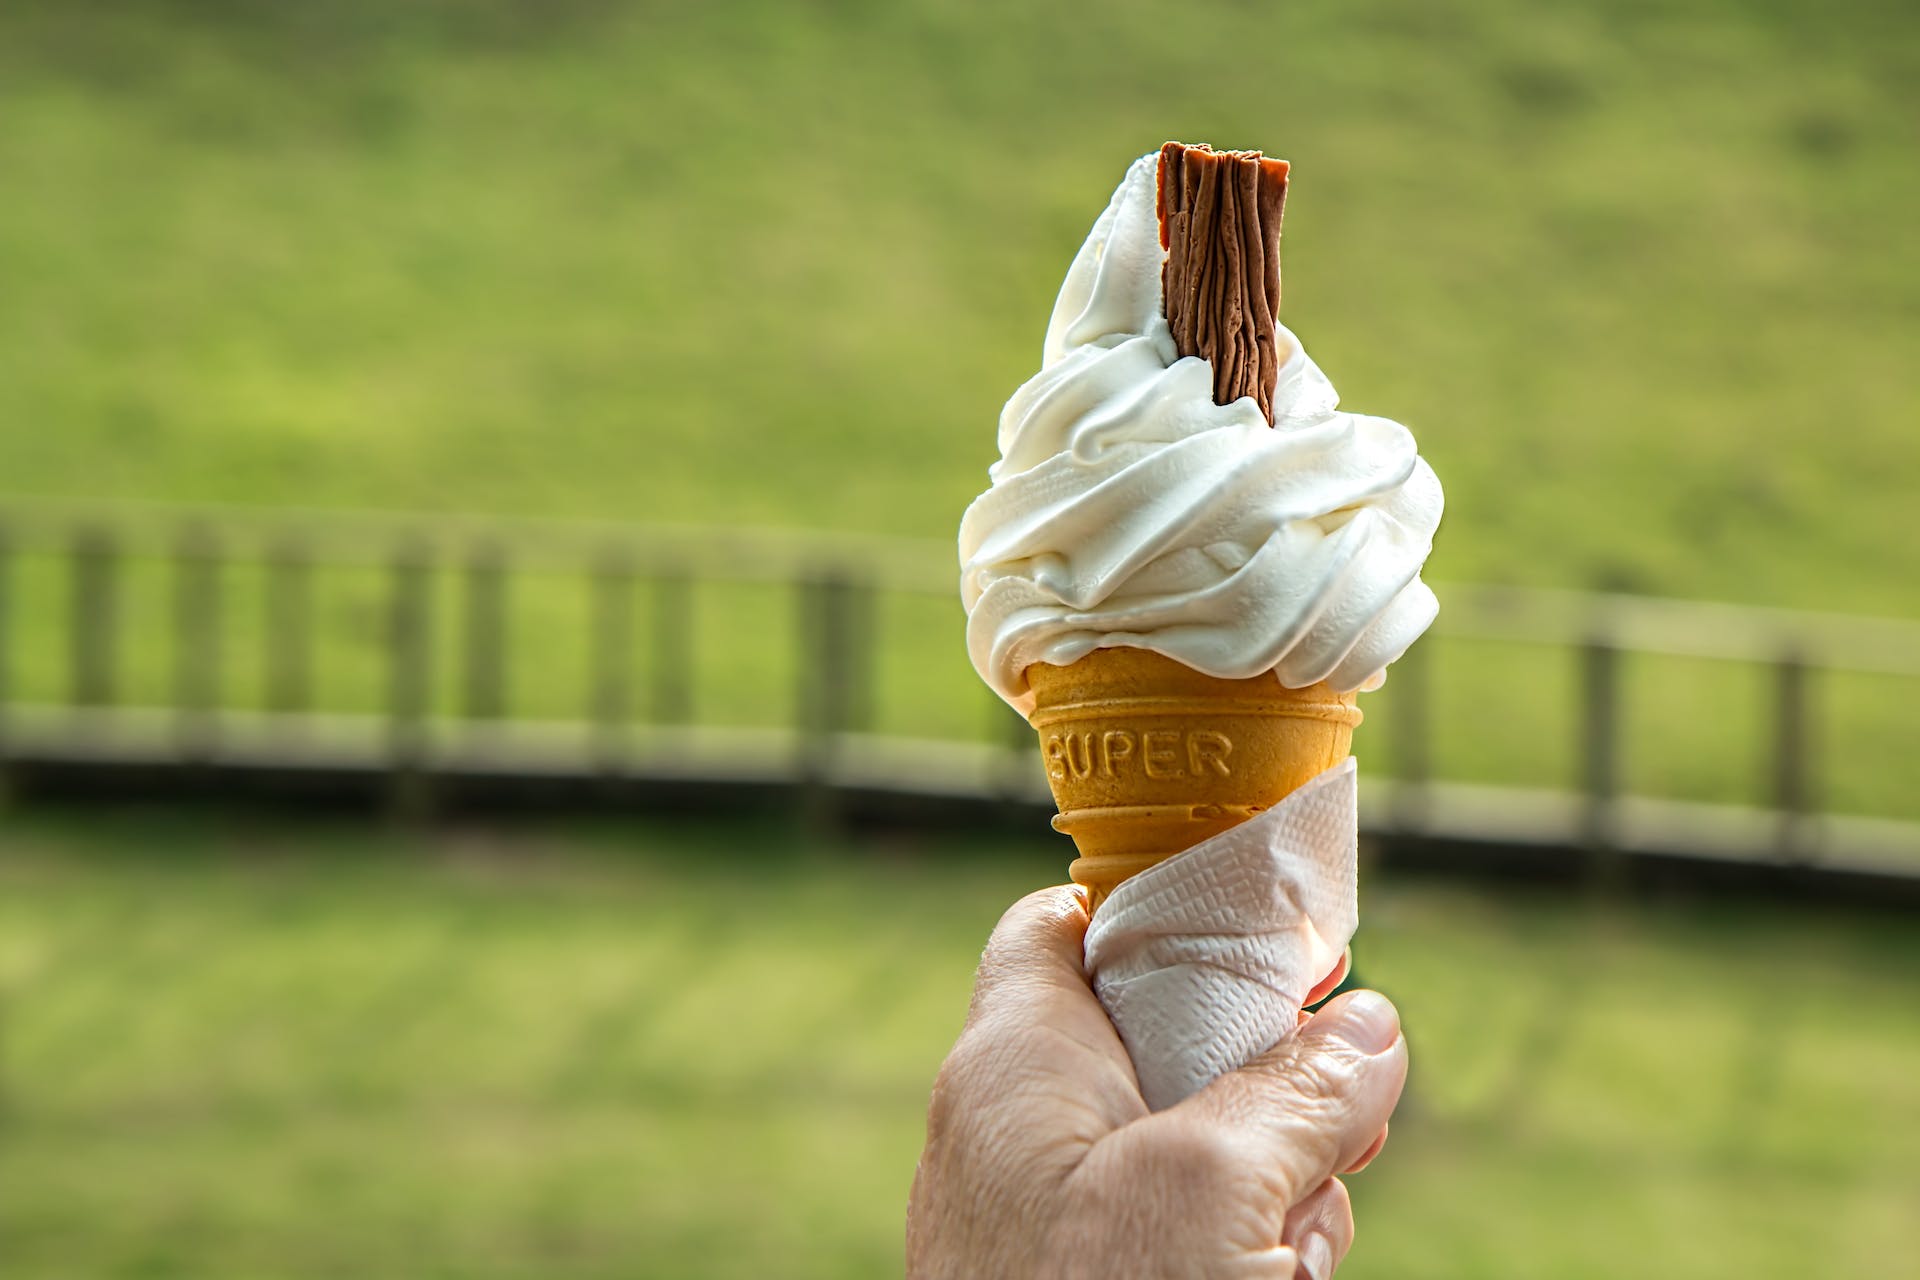 Person holding an ice cream | Source: Pexels